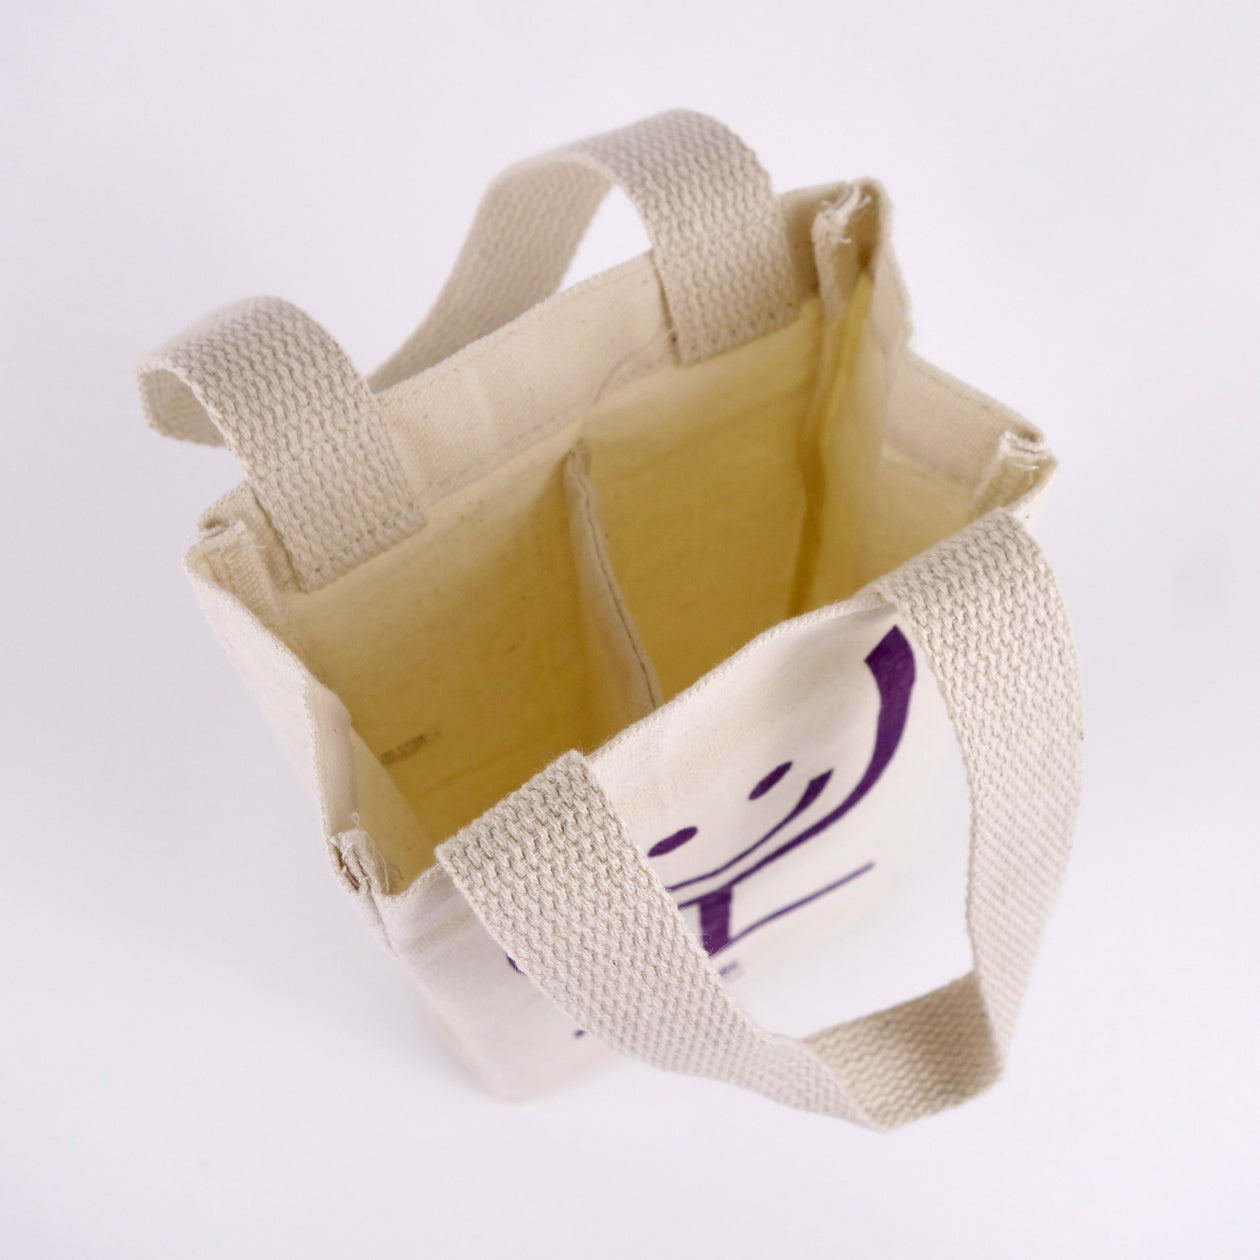 Interior detail of a canvas wine tote showing a center divider to hold two wine bottles.